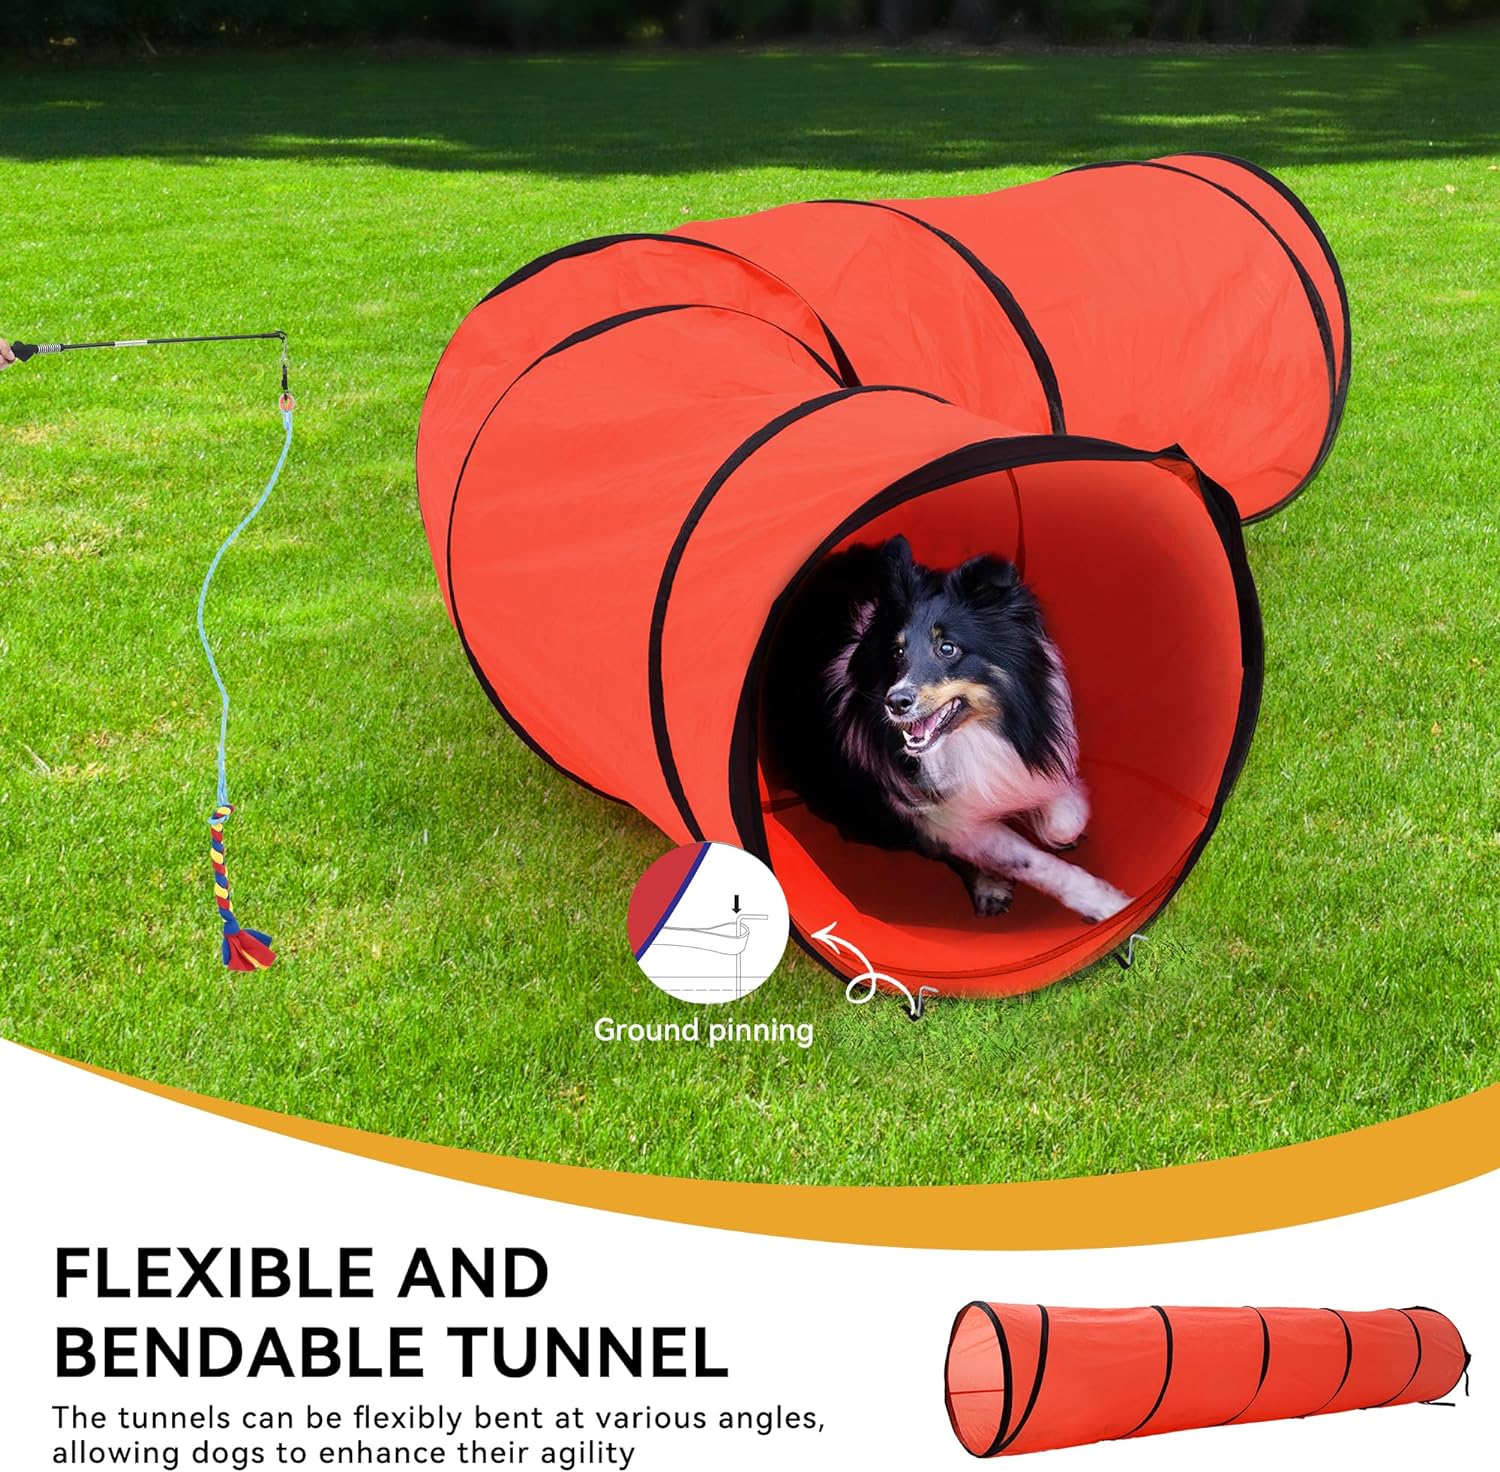 YITAHOME Dog Agility Equipments, Includes Flirt Pole Toy, 3 Flying Discs, 1 Agility Tunnel, 2 Jumps, 6 Weave Poles, Pause Box, Agility Course Set for Backyard, Indoor, Outdoor